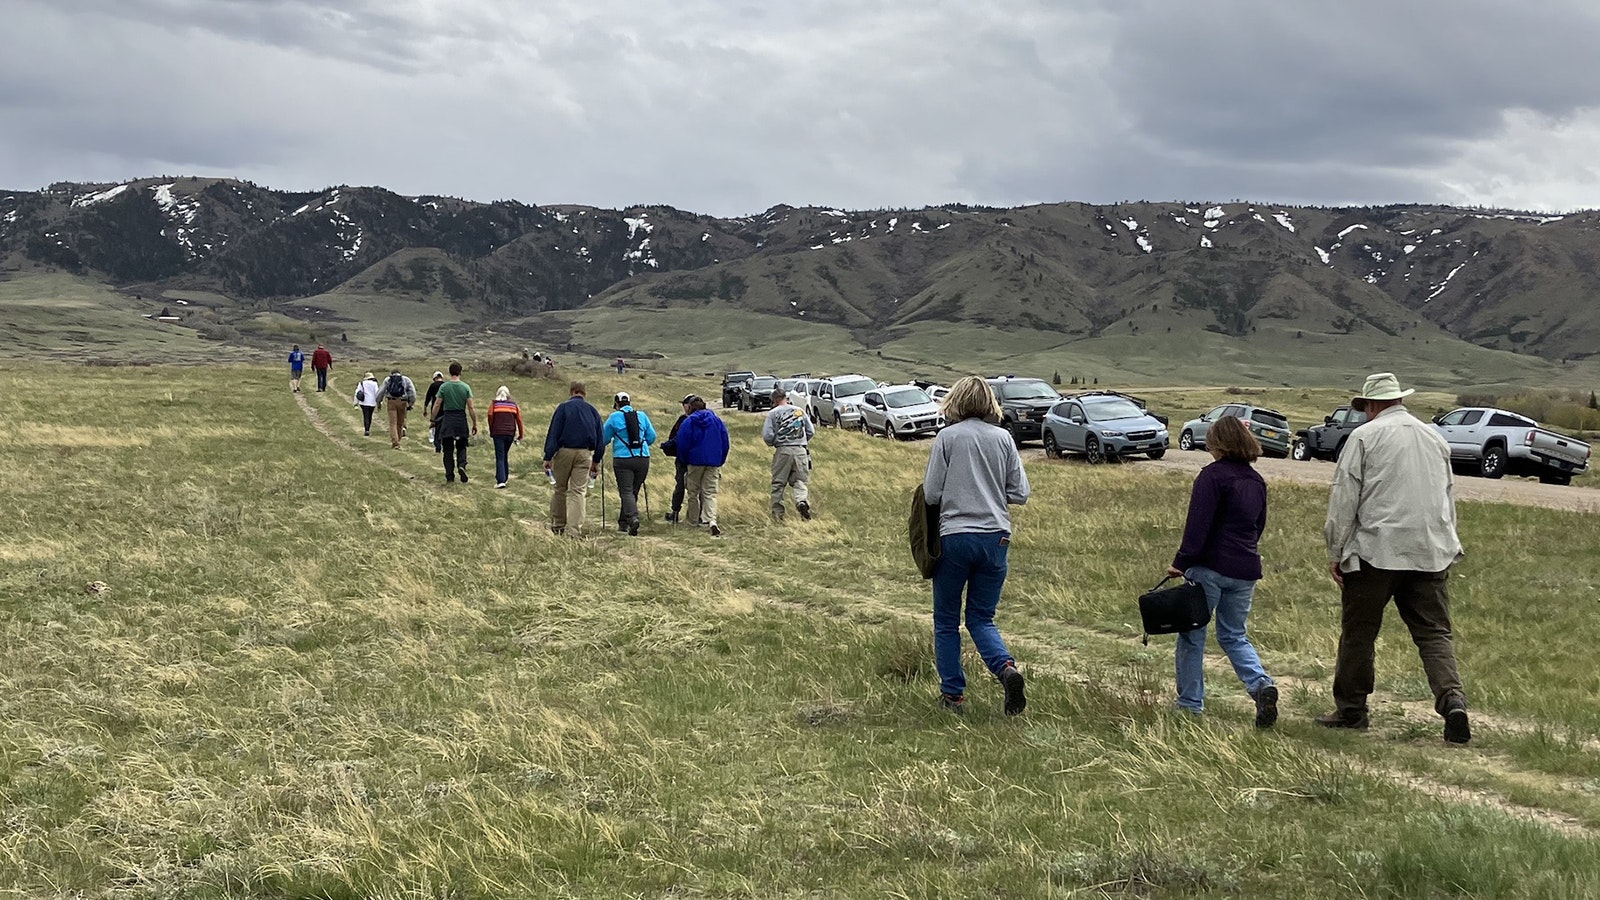 Many participants walked a 3 ½-mile trail through the School Section to see the nature and beauty of the land.